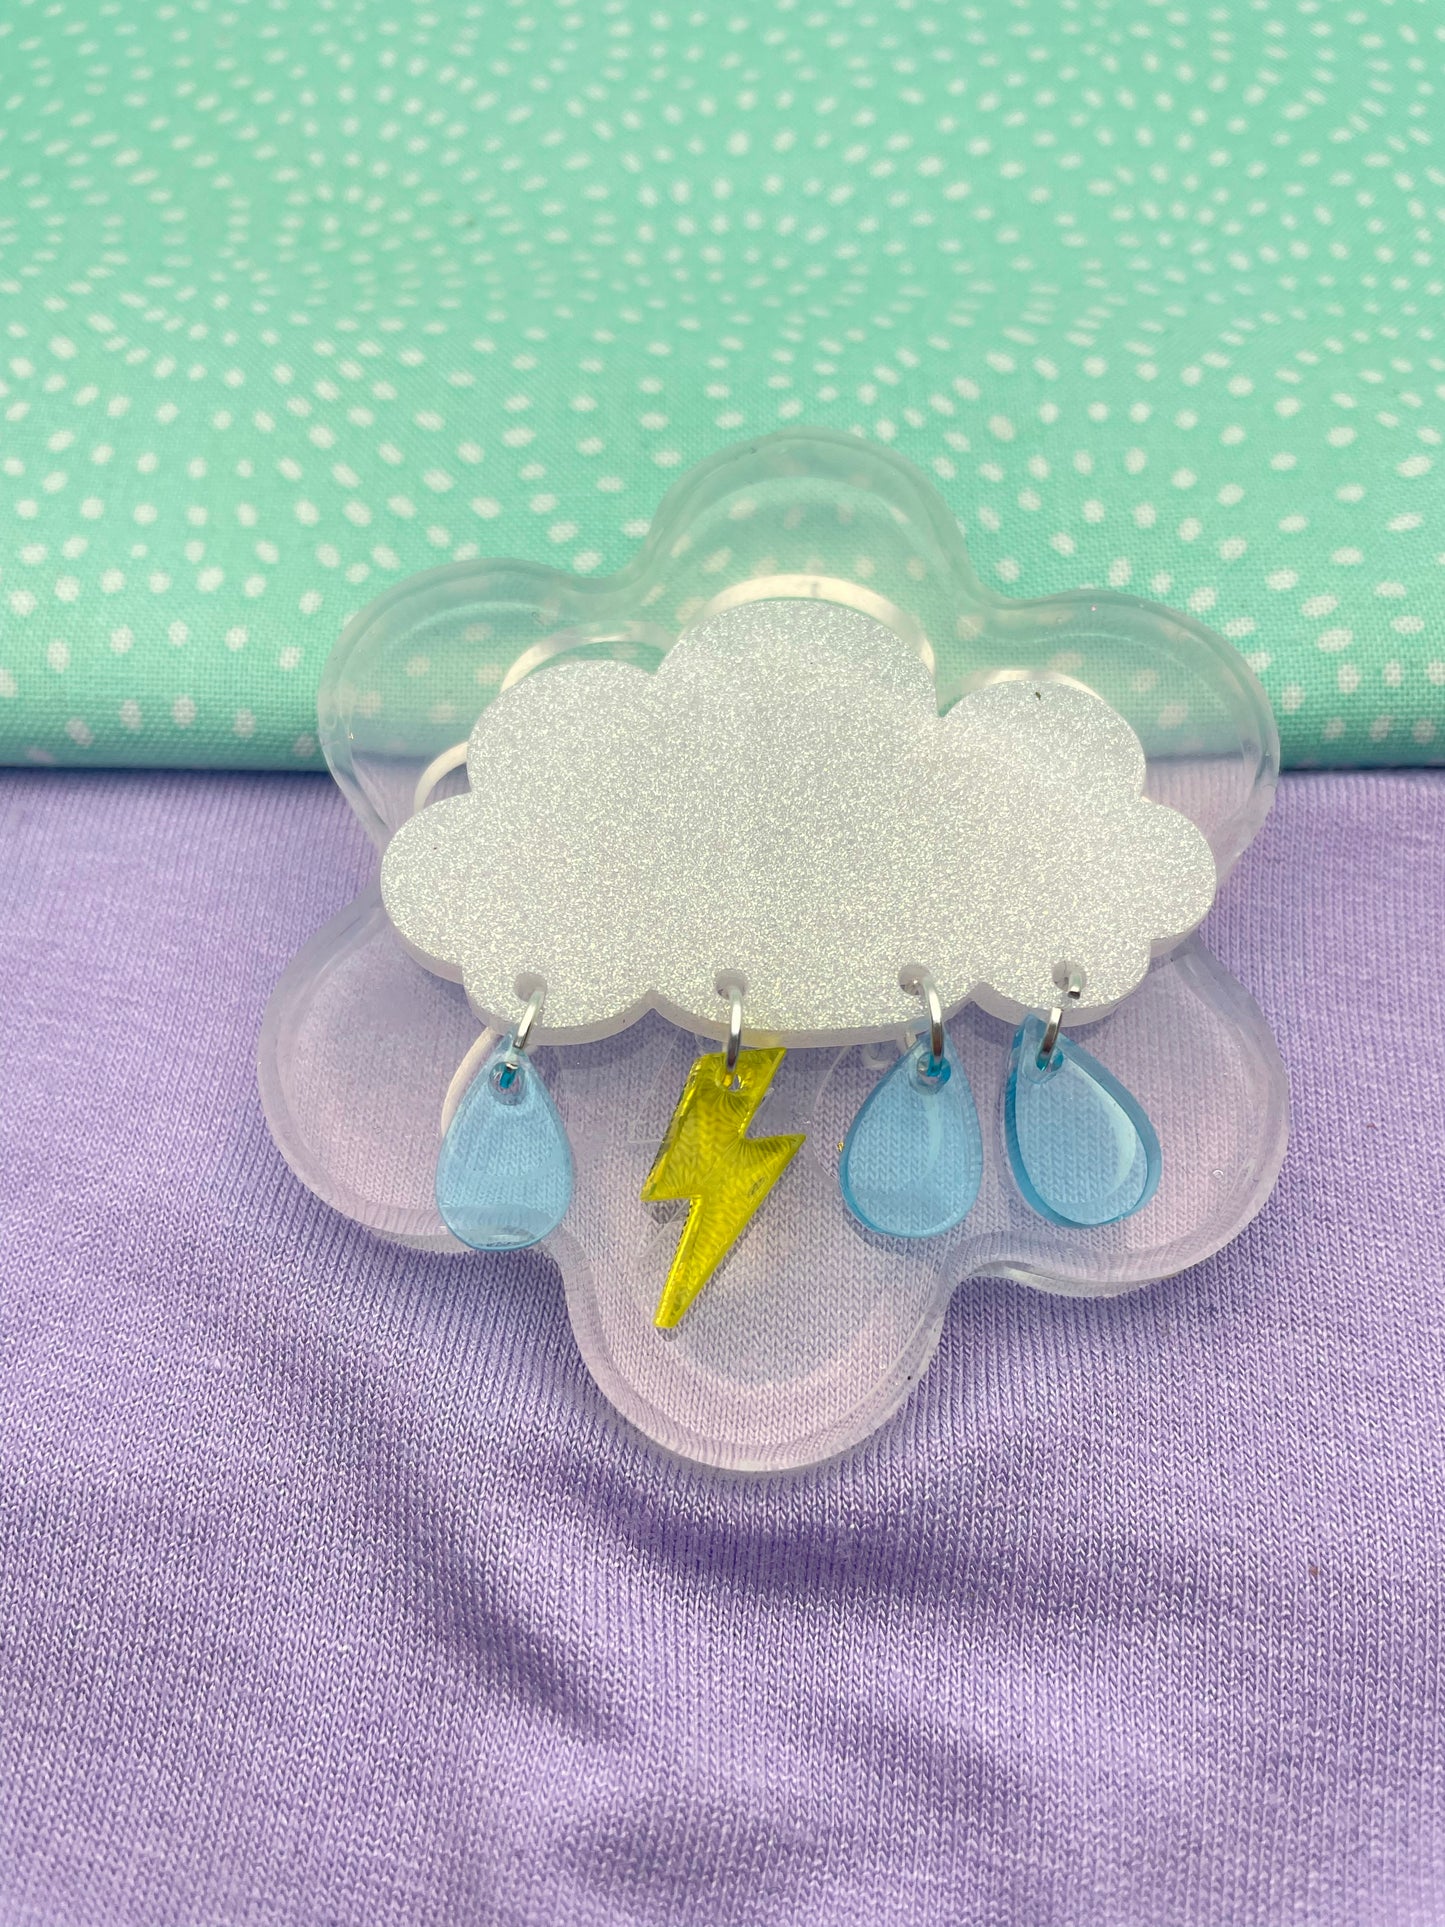 Rainy clouds stormy weather brooch pendant mold